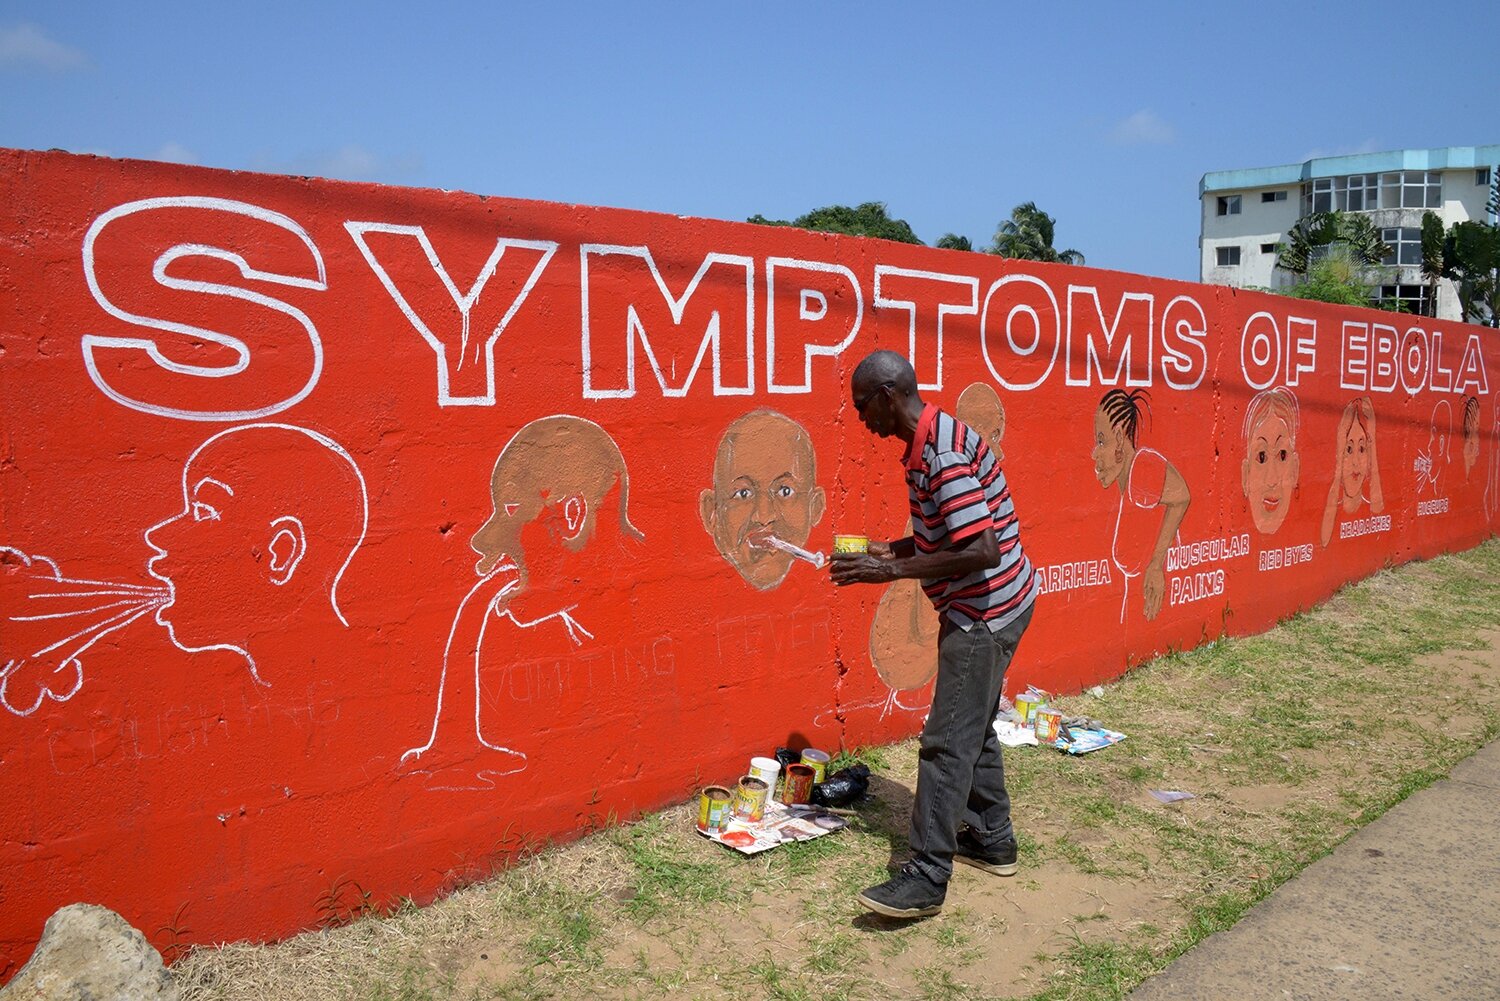 wellcome-street-artist-stephen-doe-paints-an-educational-mural-about-ebola-in-liberia_-2014_-credit-dominique-faget_-afp_-getty--images.jpg